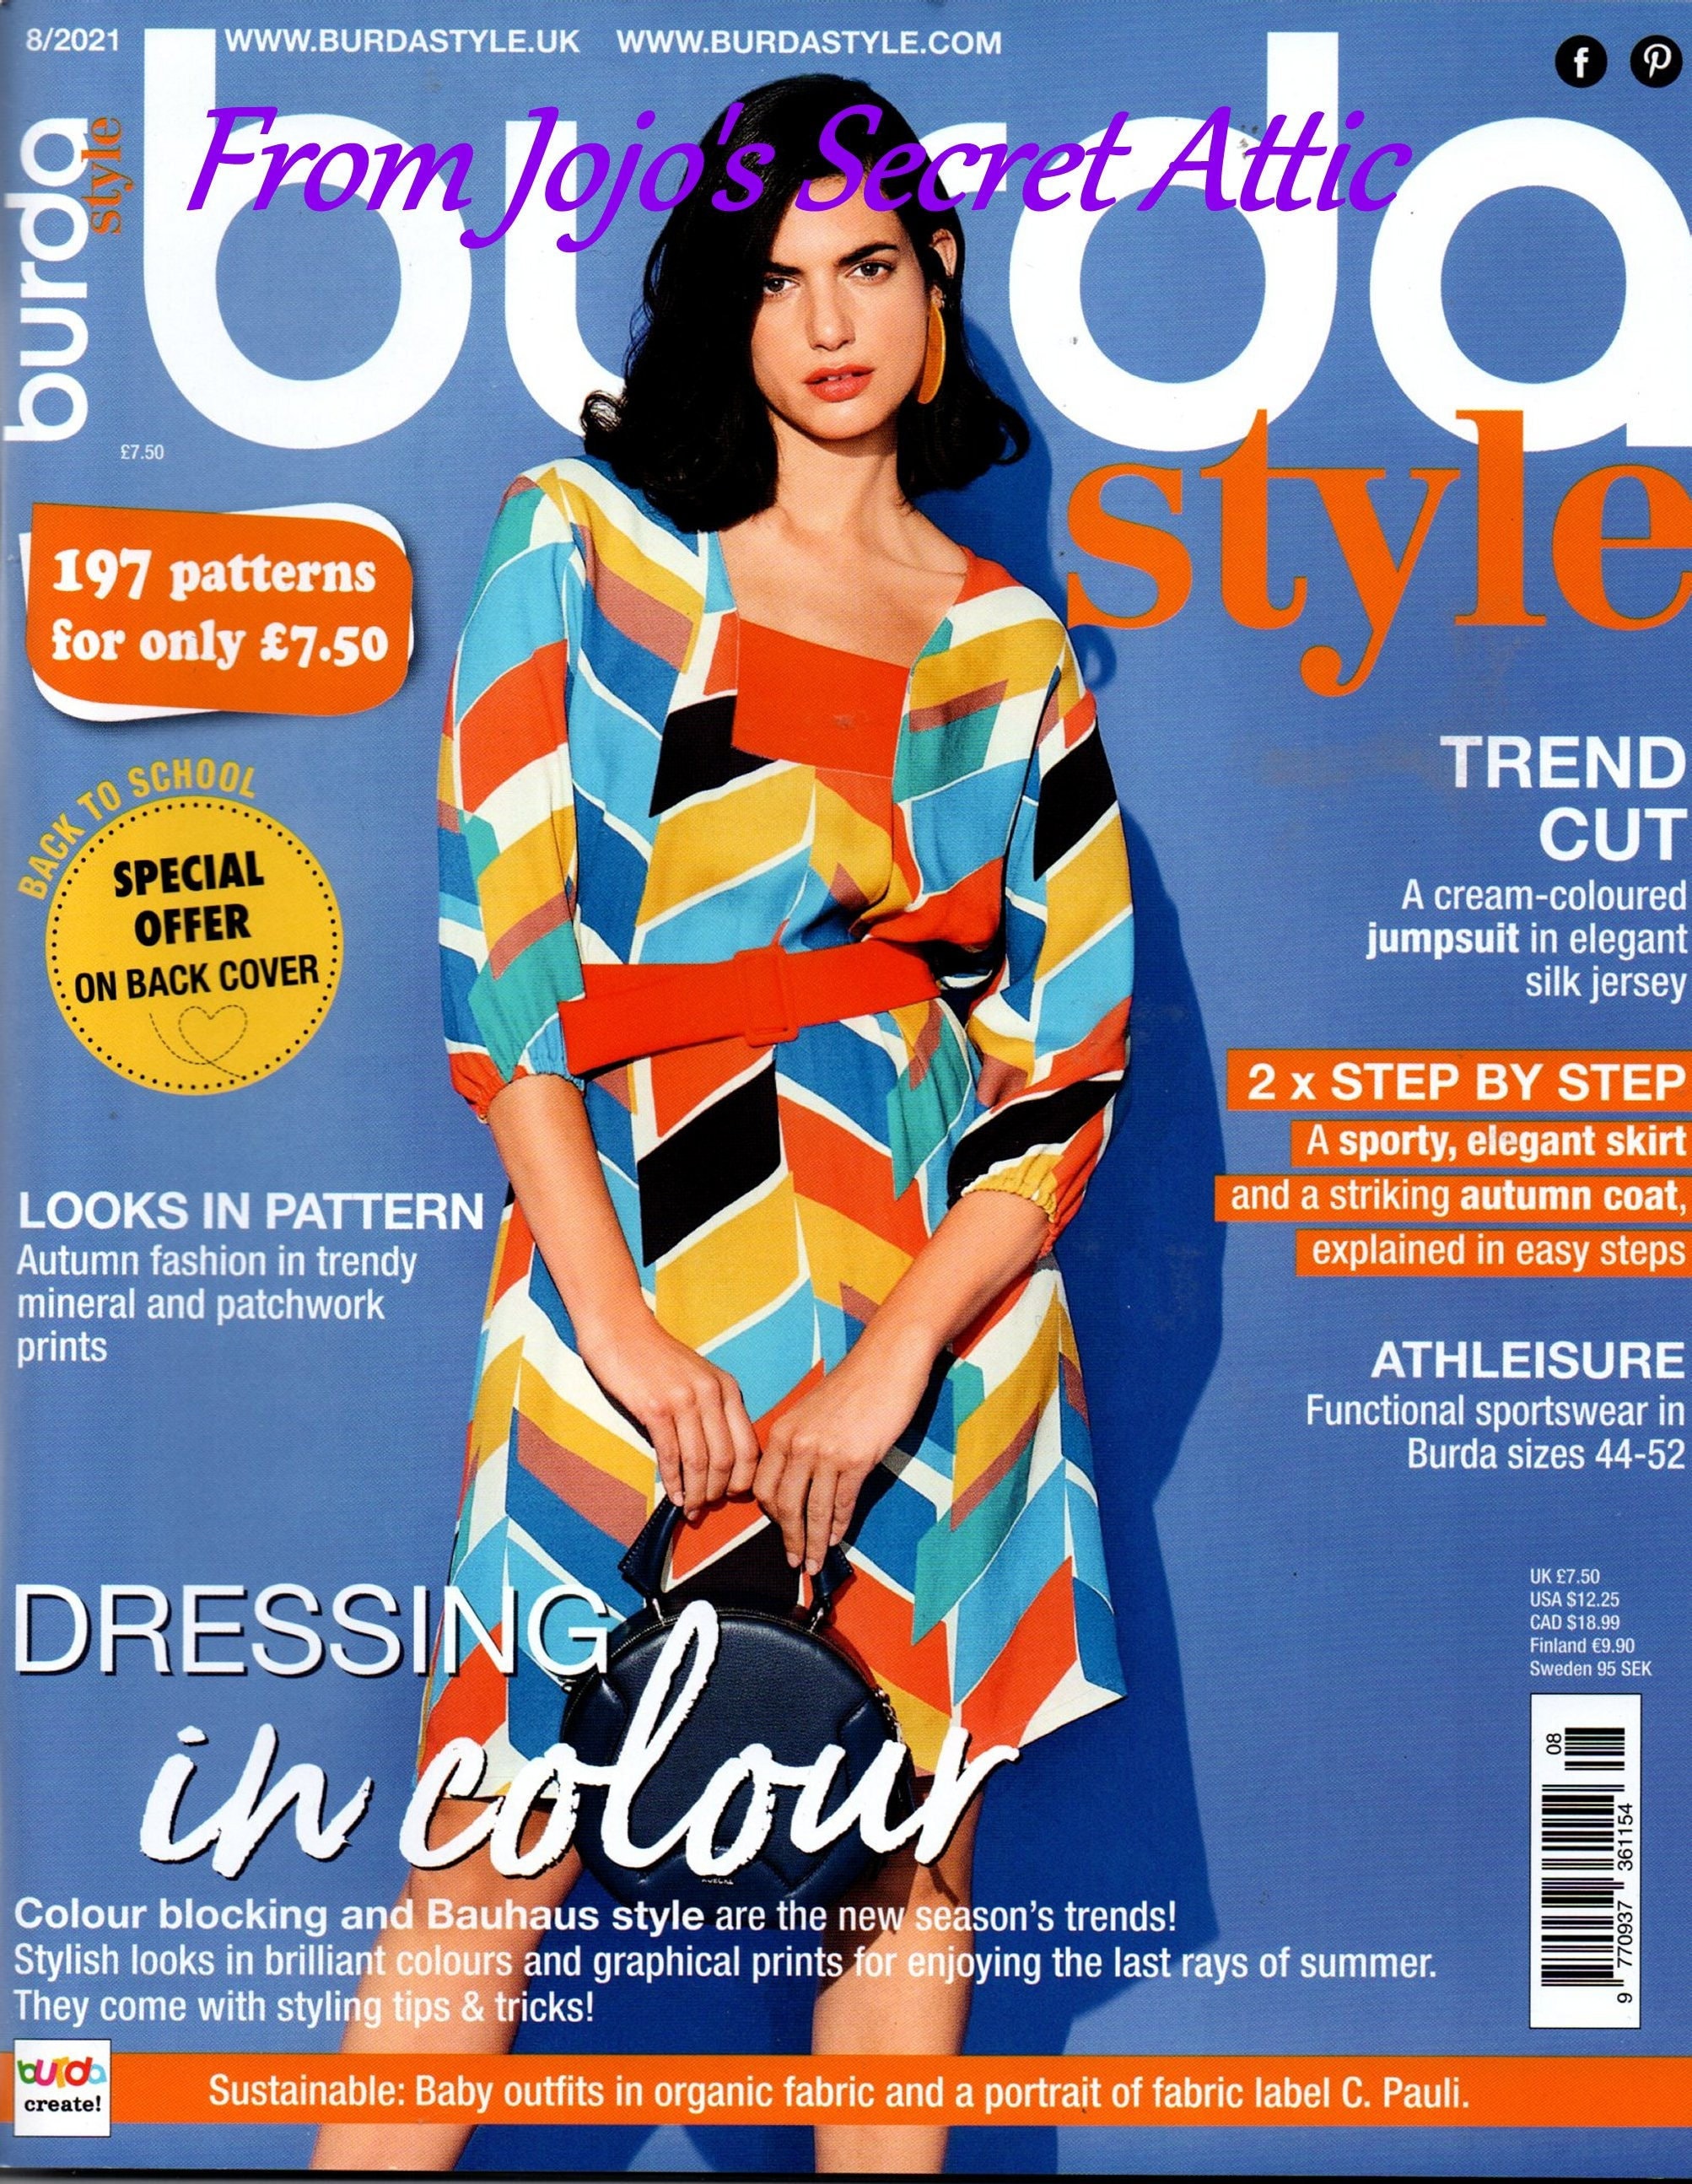 Burda Style Magazine August 08/2021 New with 197 uncut patterns -   Portugal